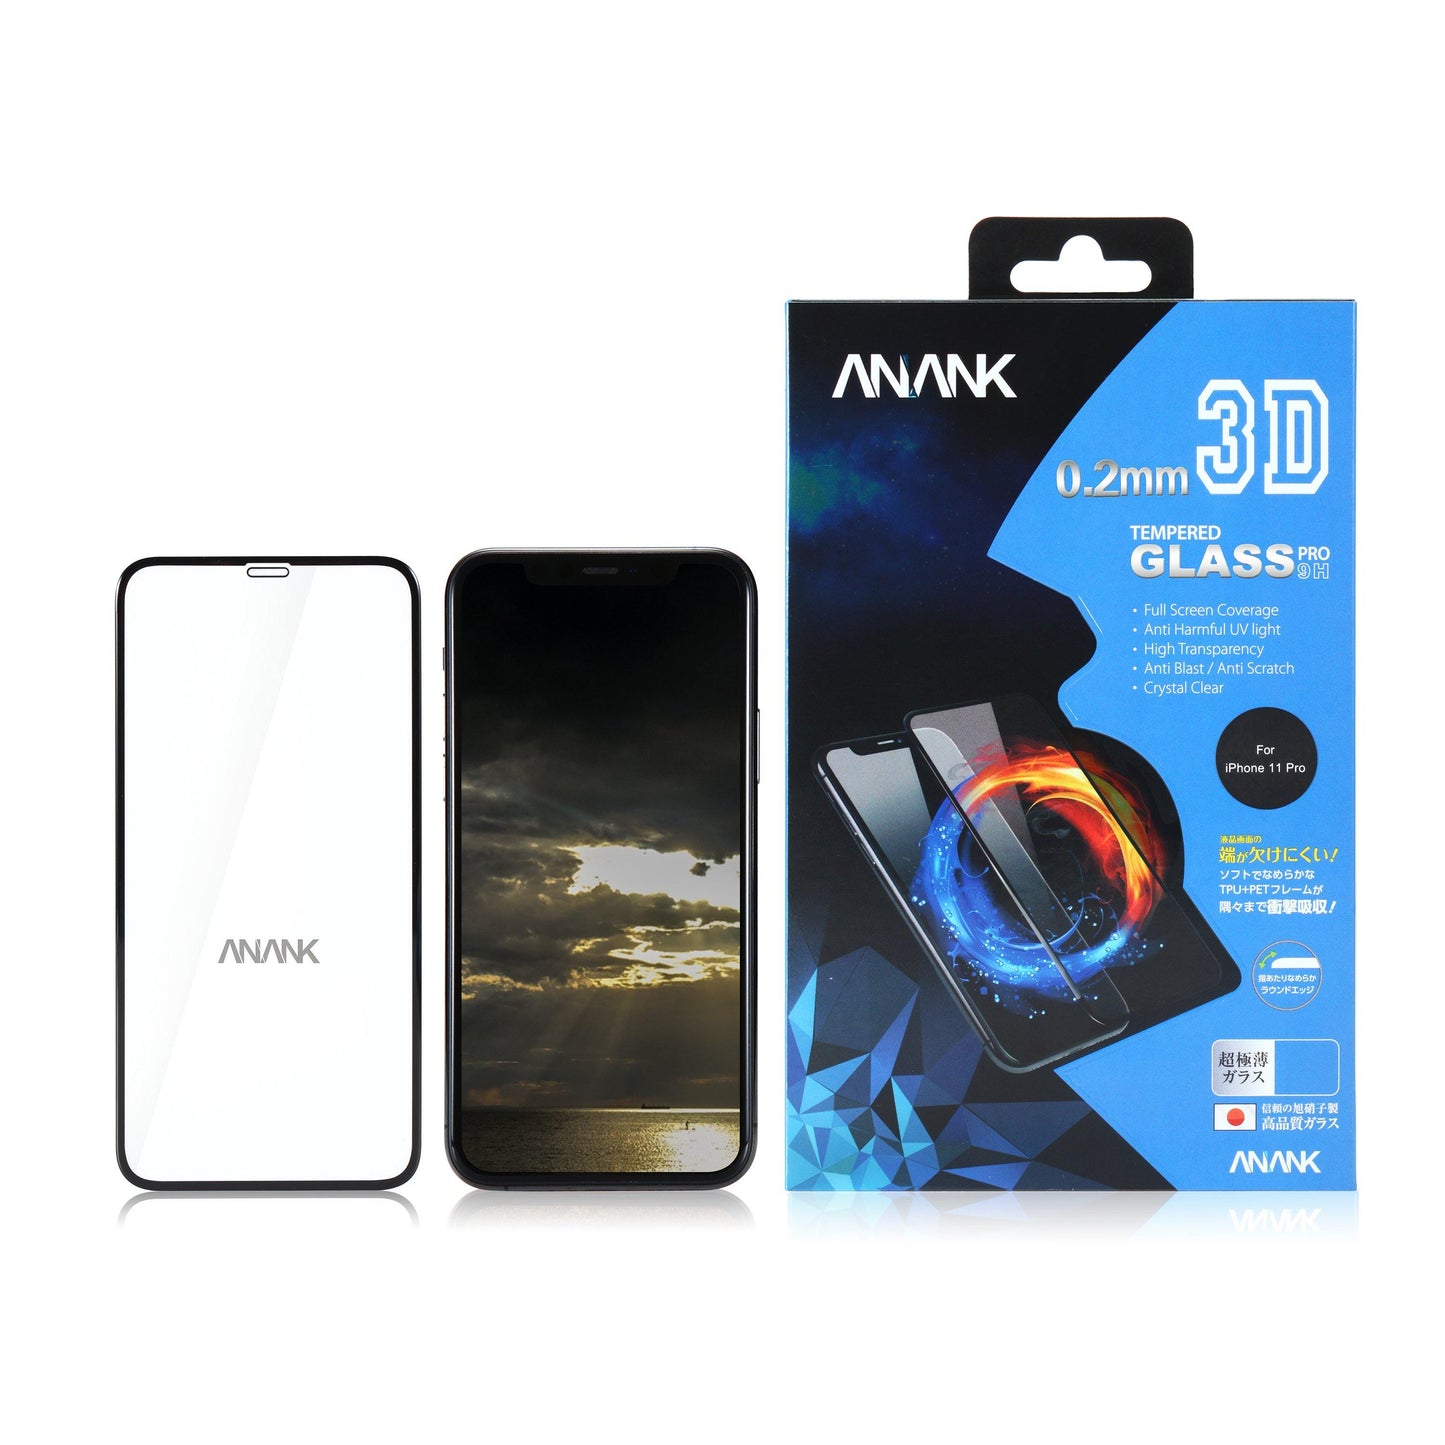 ANANK 9H Hardness Full Coverage Tempered Glass Screen Protector Film for Apple iPhone - Armor King Case